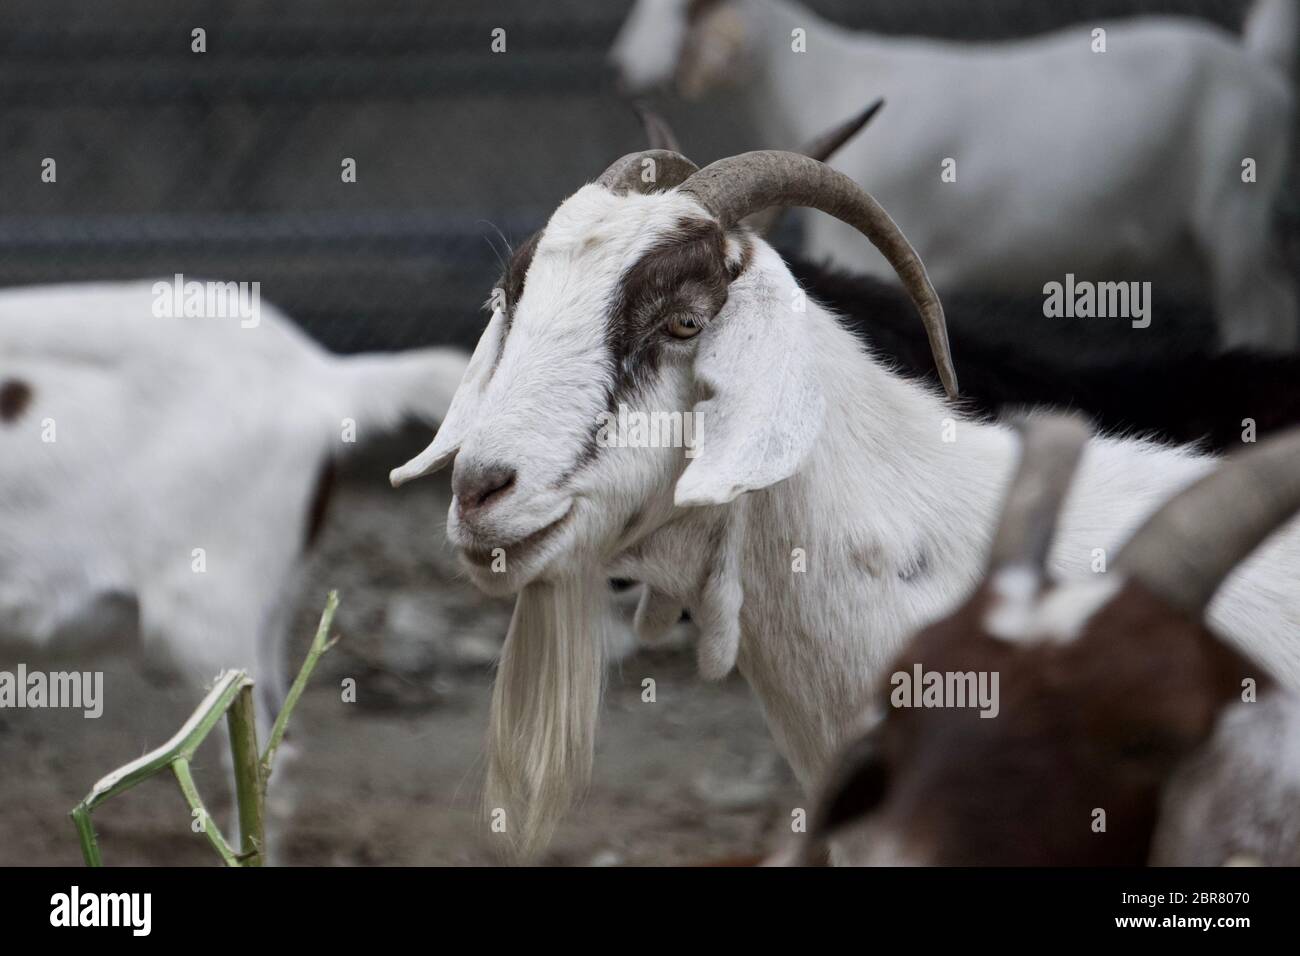 Rented goat with beard hired to graze and remove weeds for sustainable land management and fire risk reduction in the city. Oakland, California Stock Photo